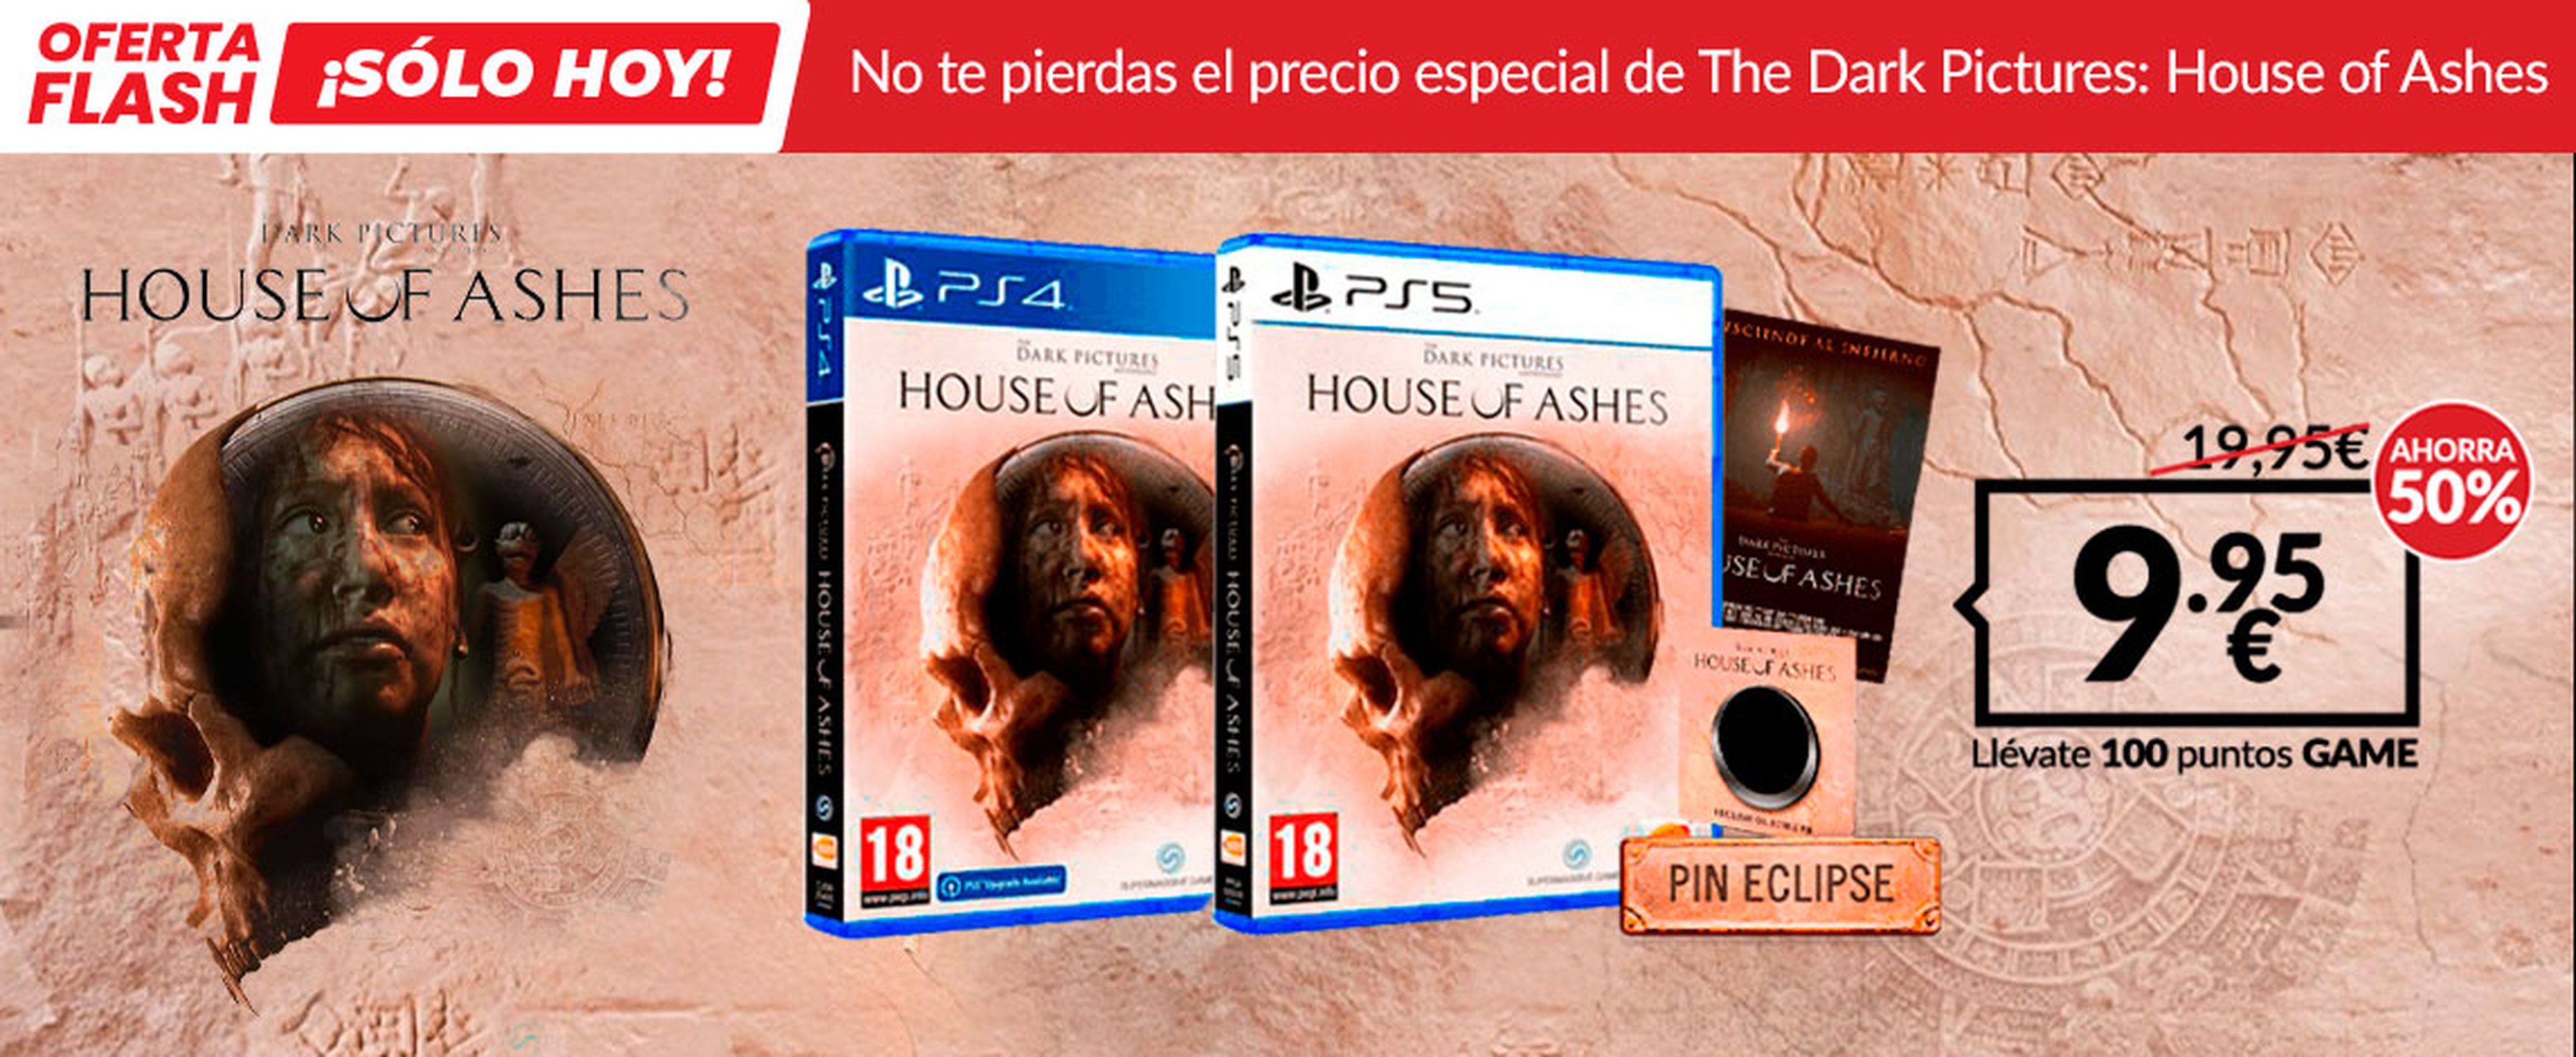 Oferta flash en GAME: The Dark Pictures House of Ashes a 9,95